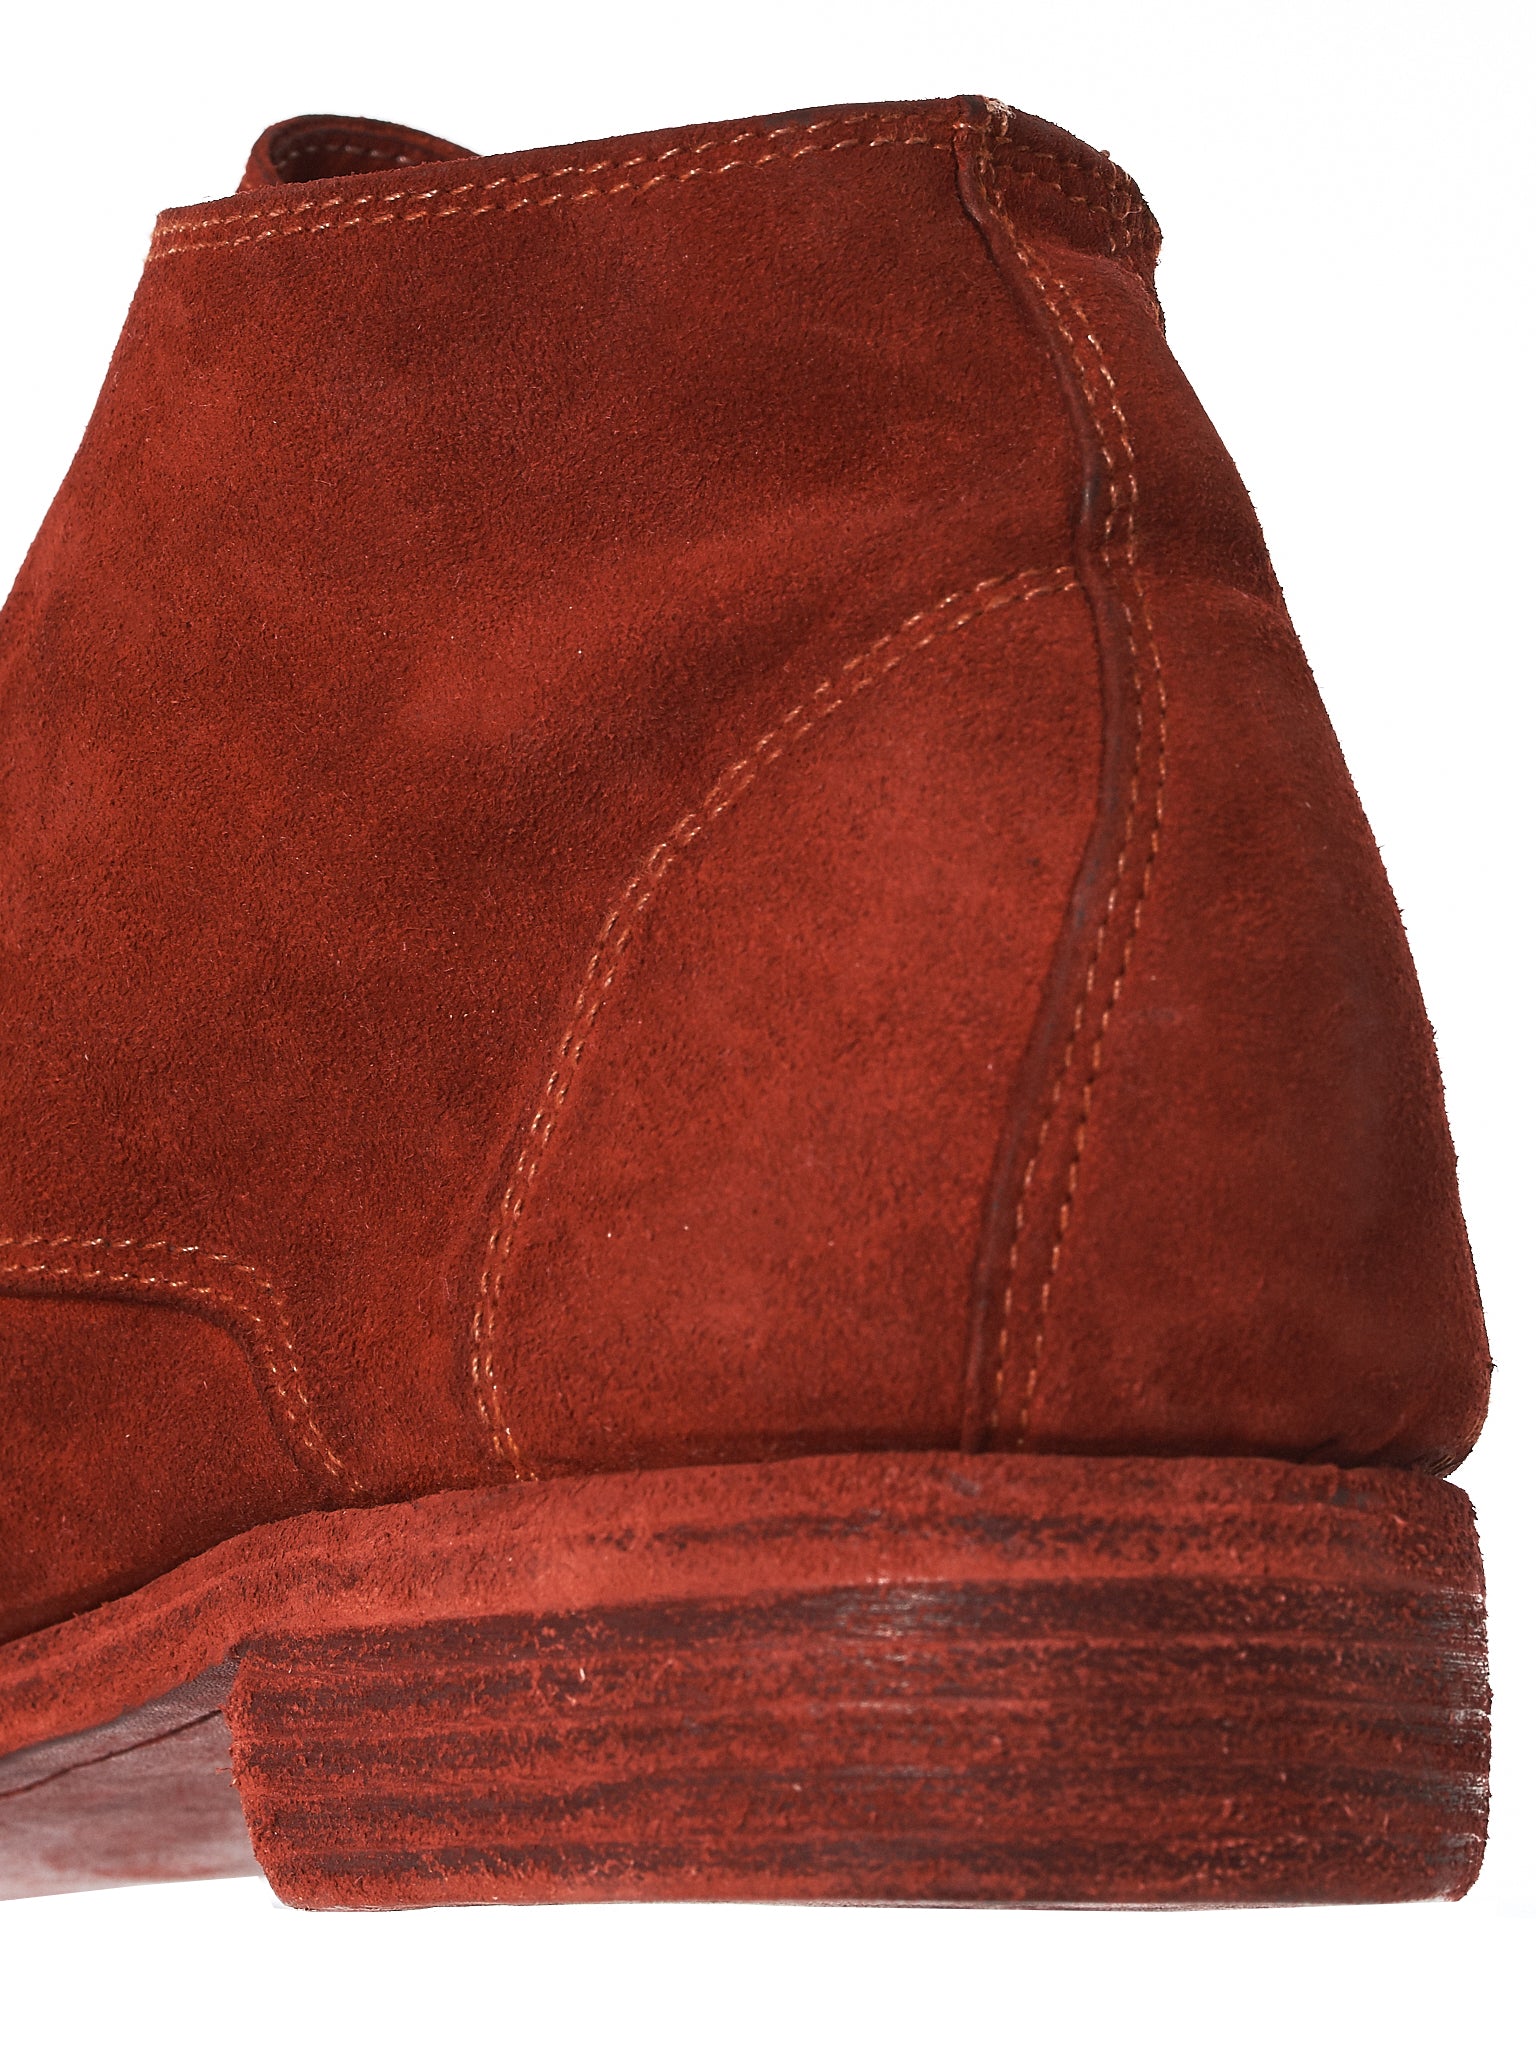 Suede Dyed Leather Boots (994-KANGAROO-REVERSE-1006T)